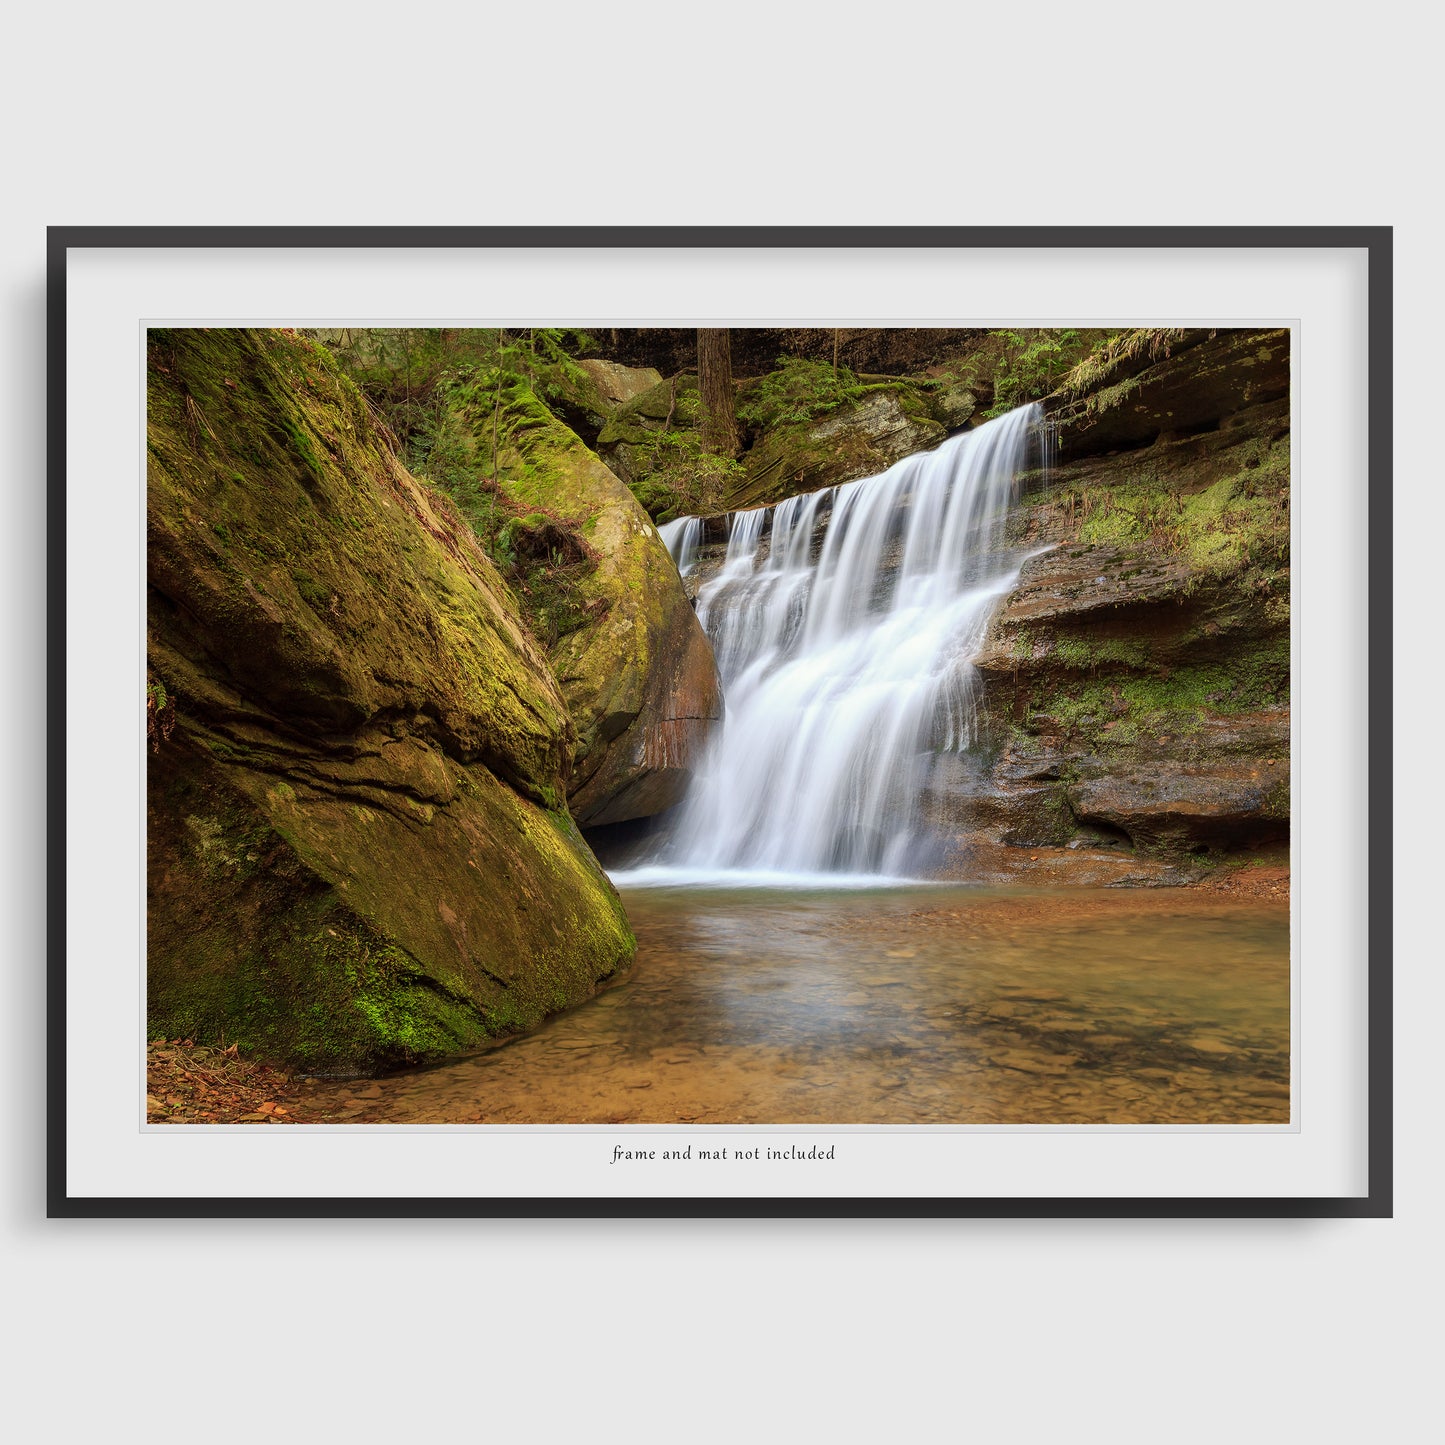 Image displaying a waterfall wall art print within a thin black frame and white mat, meant to inspire potential display options. The actual product is the print only; the frame and mat are not included with purchase.